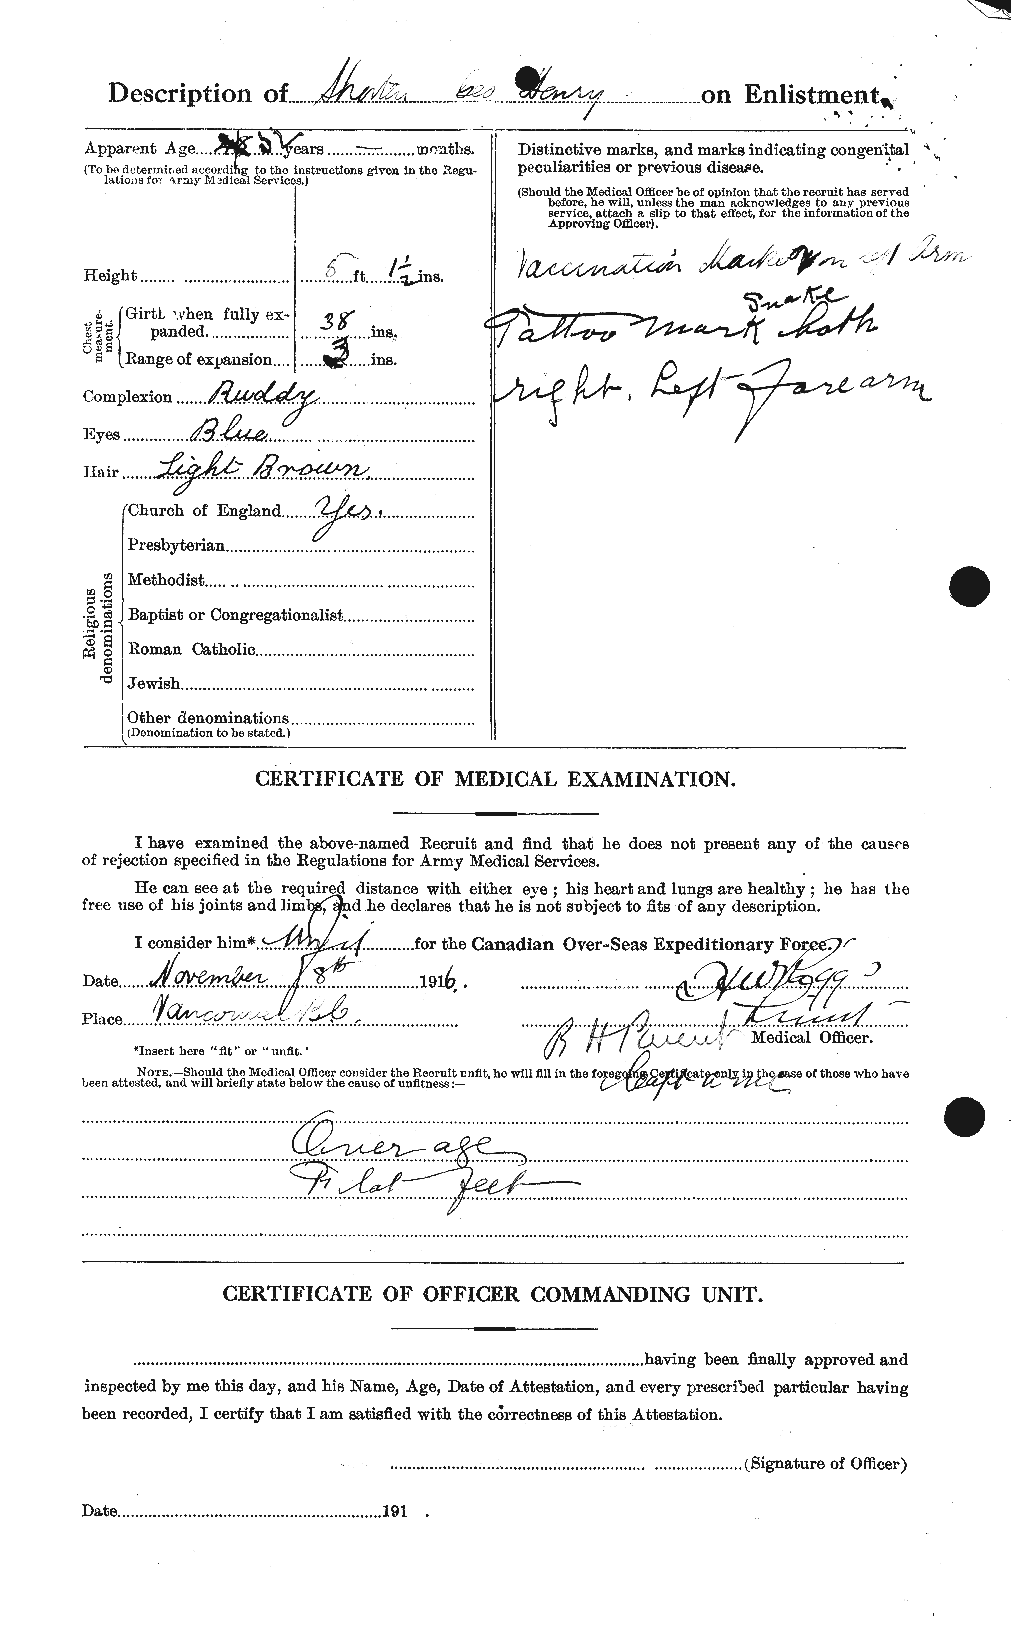 Personnel Records of the First World War - CEF 093422b